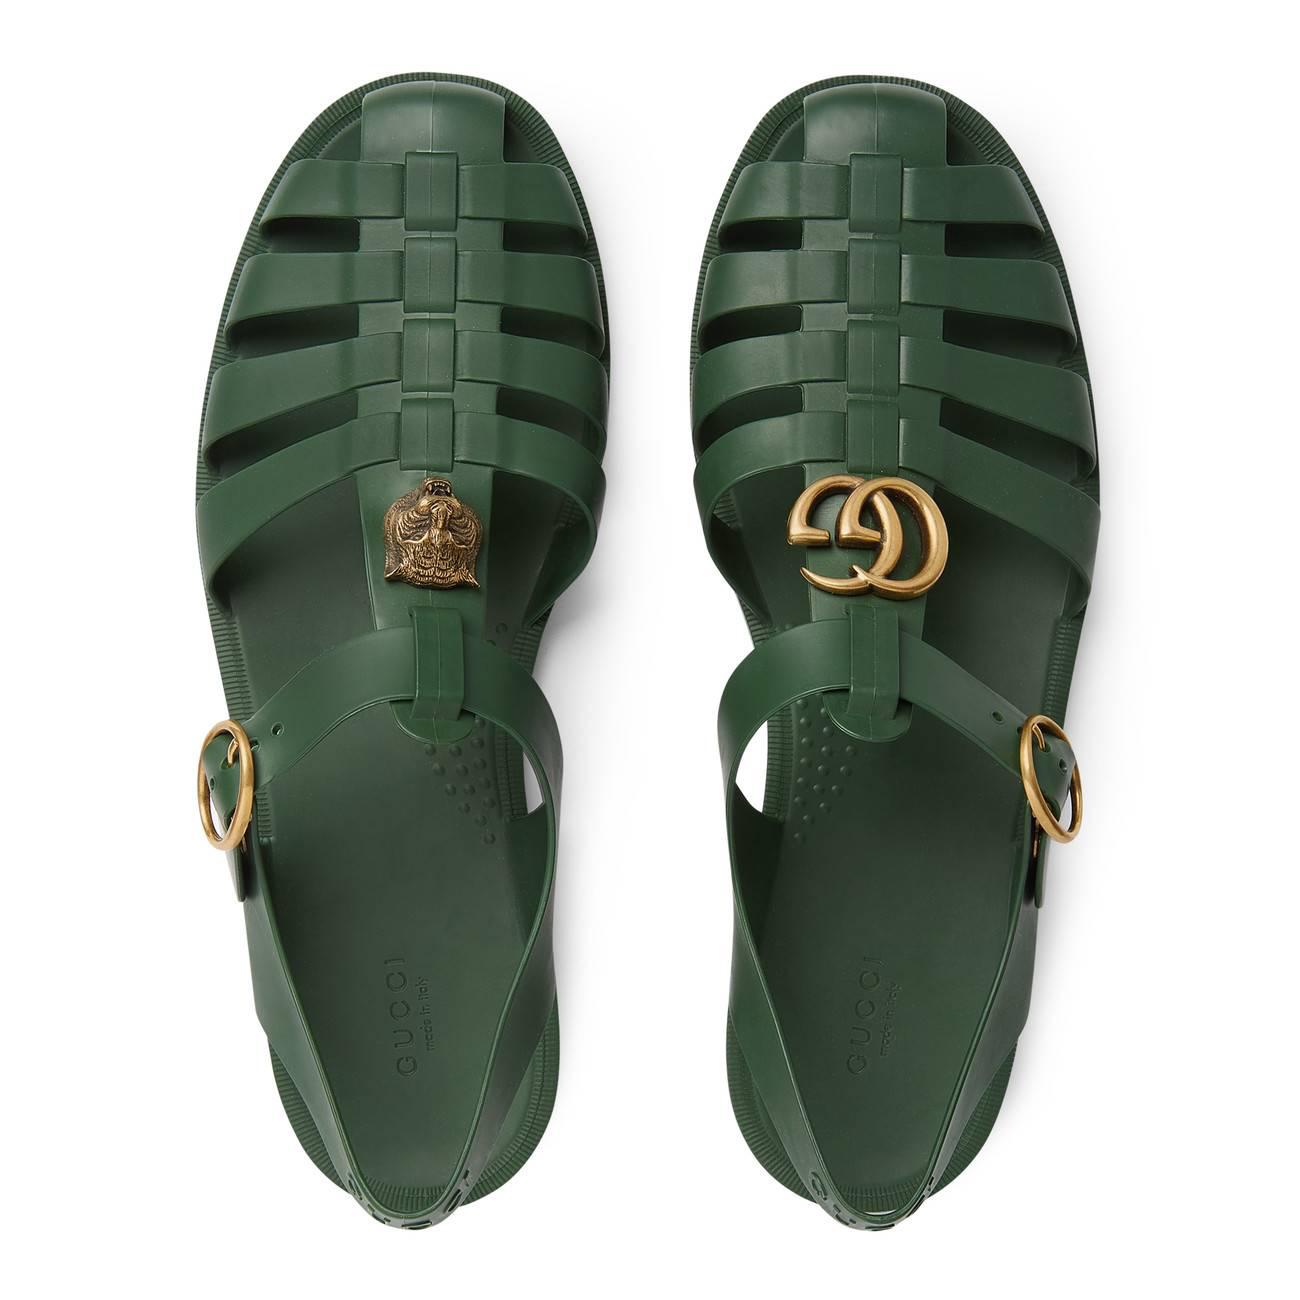 Gucci Rubber Buckle Strap Sandal in Green for Men